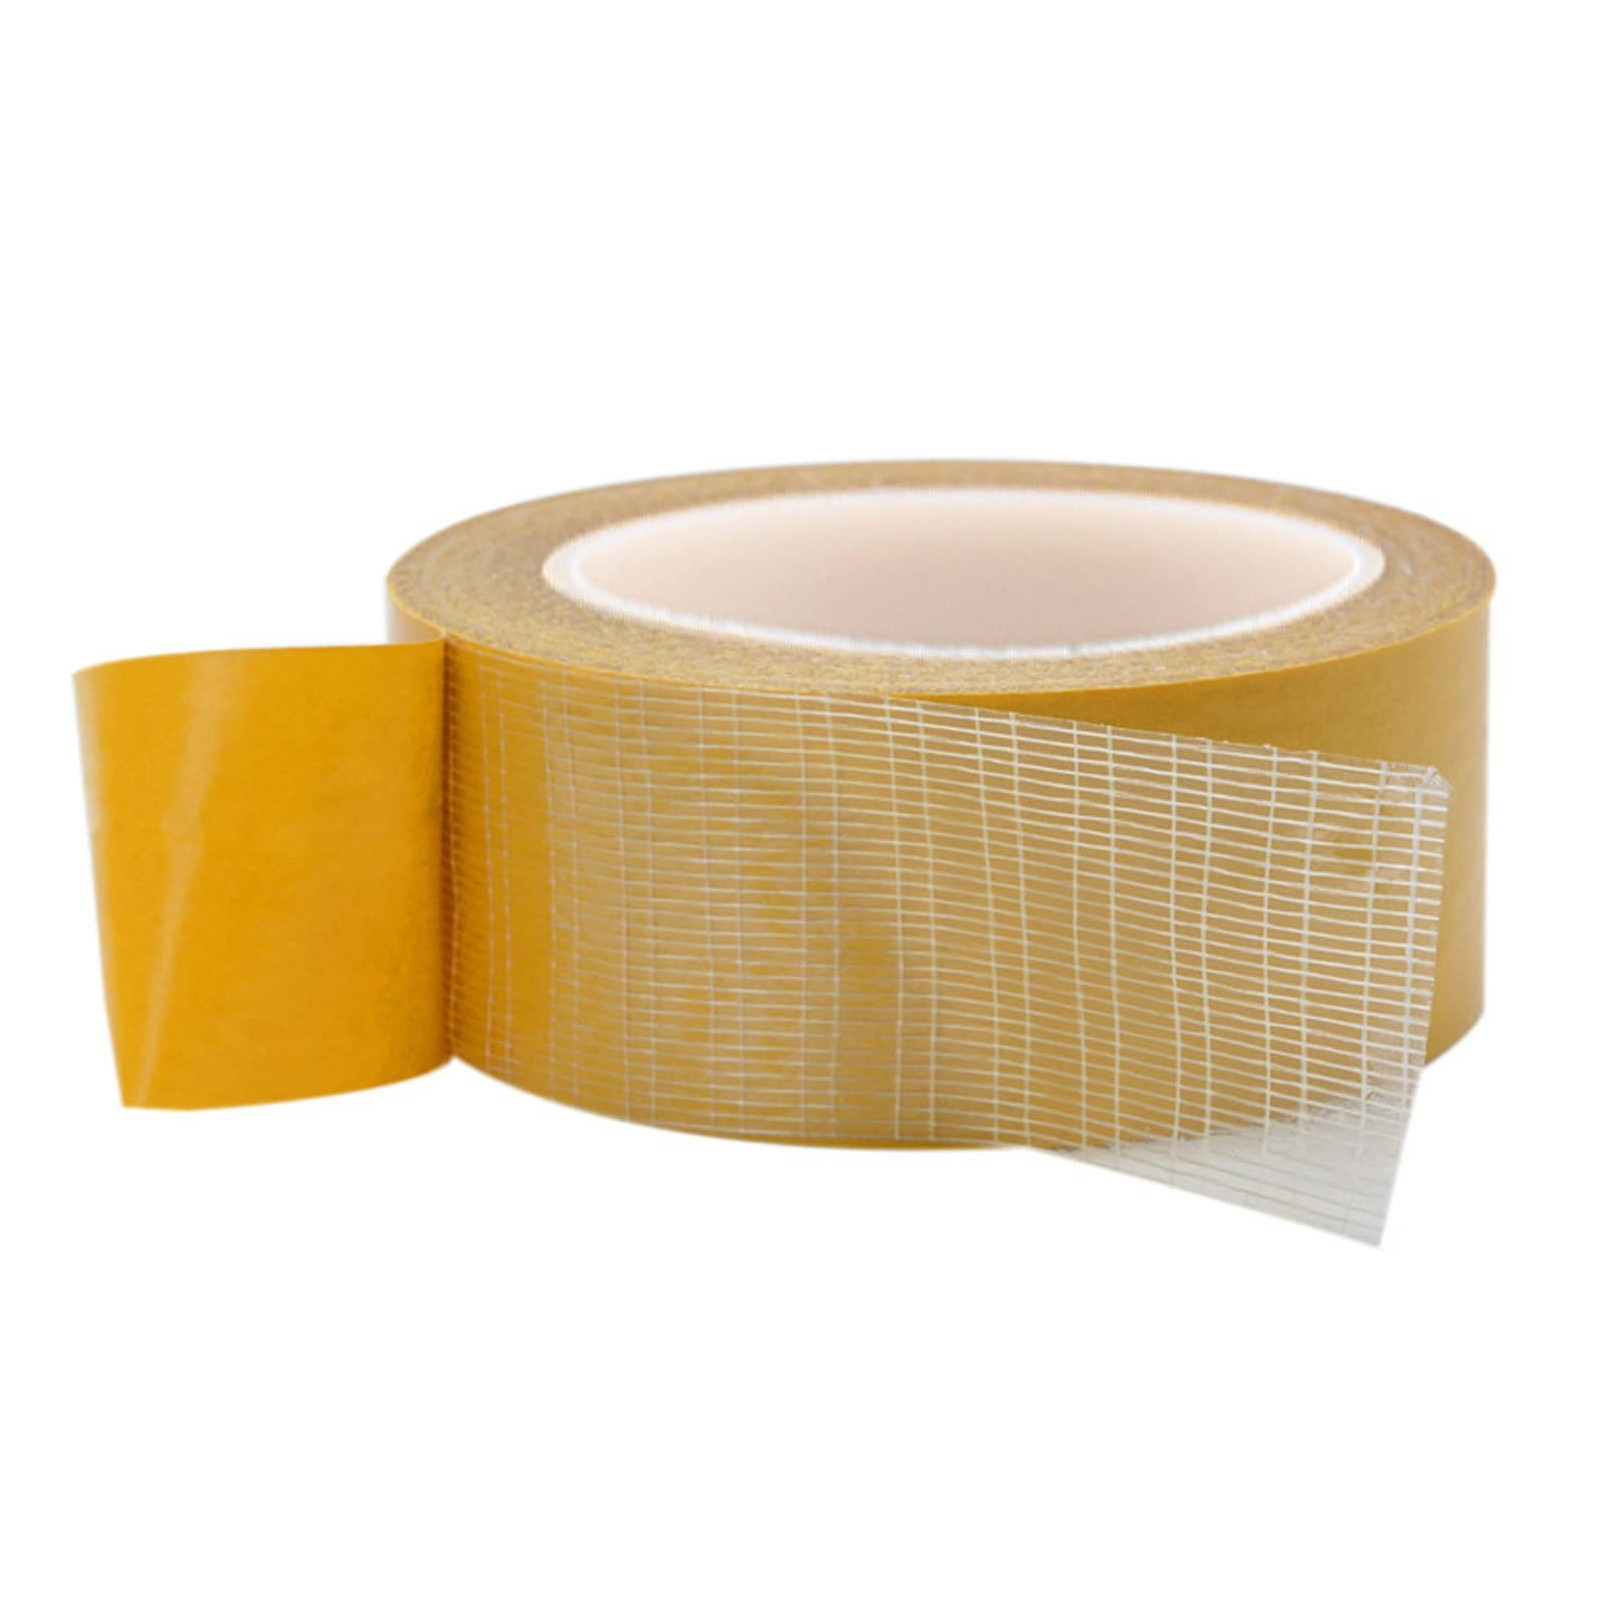 Wmkox8yii High Adhesive Strength Double Side Carpet Tape,Strong Double Side Tape,Carpet Tape for Rug Two Side,Outdoor Double Side Tape,Edge Band,for